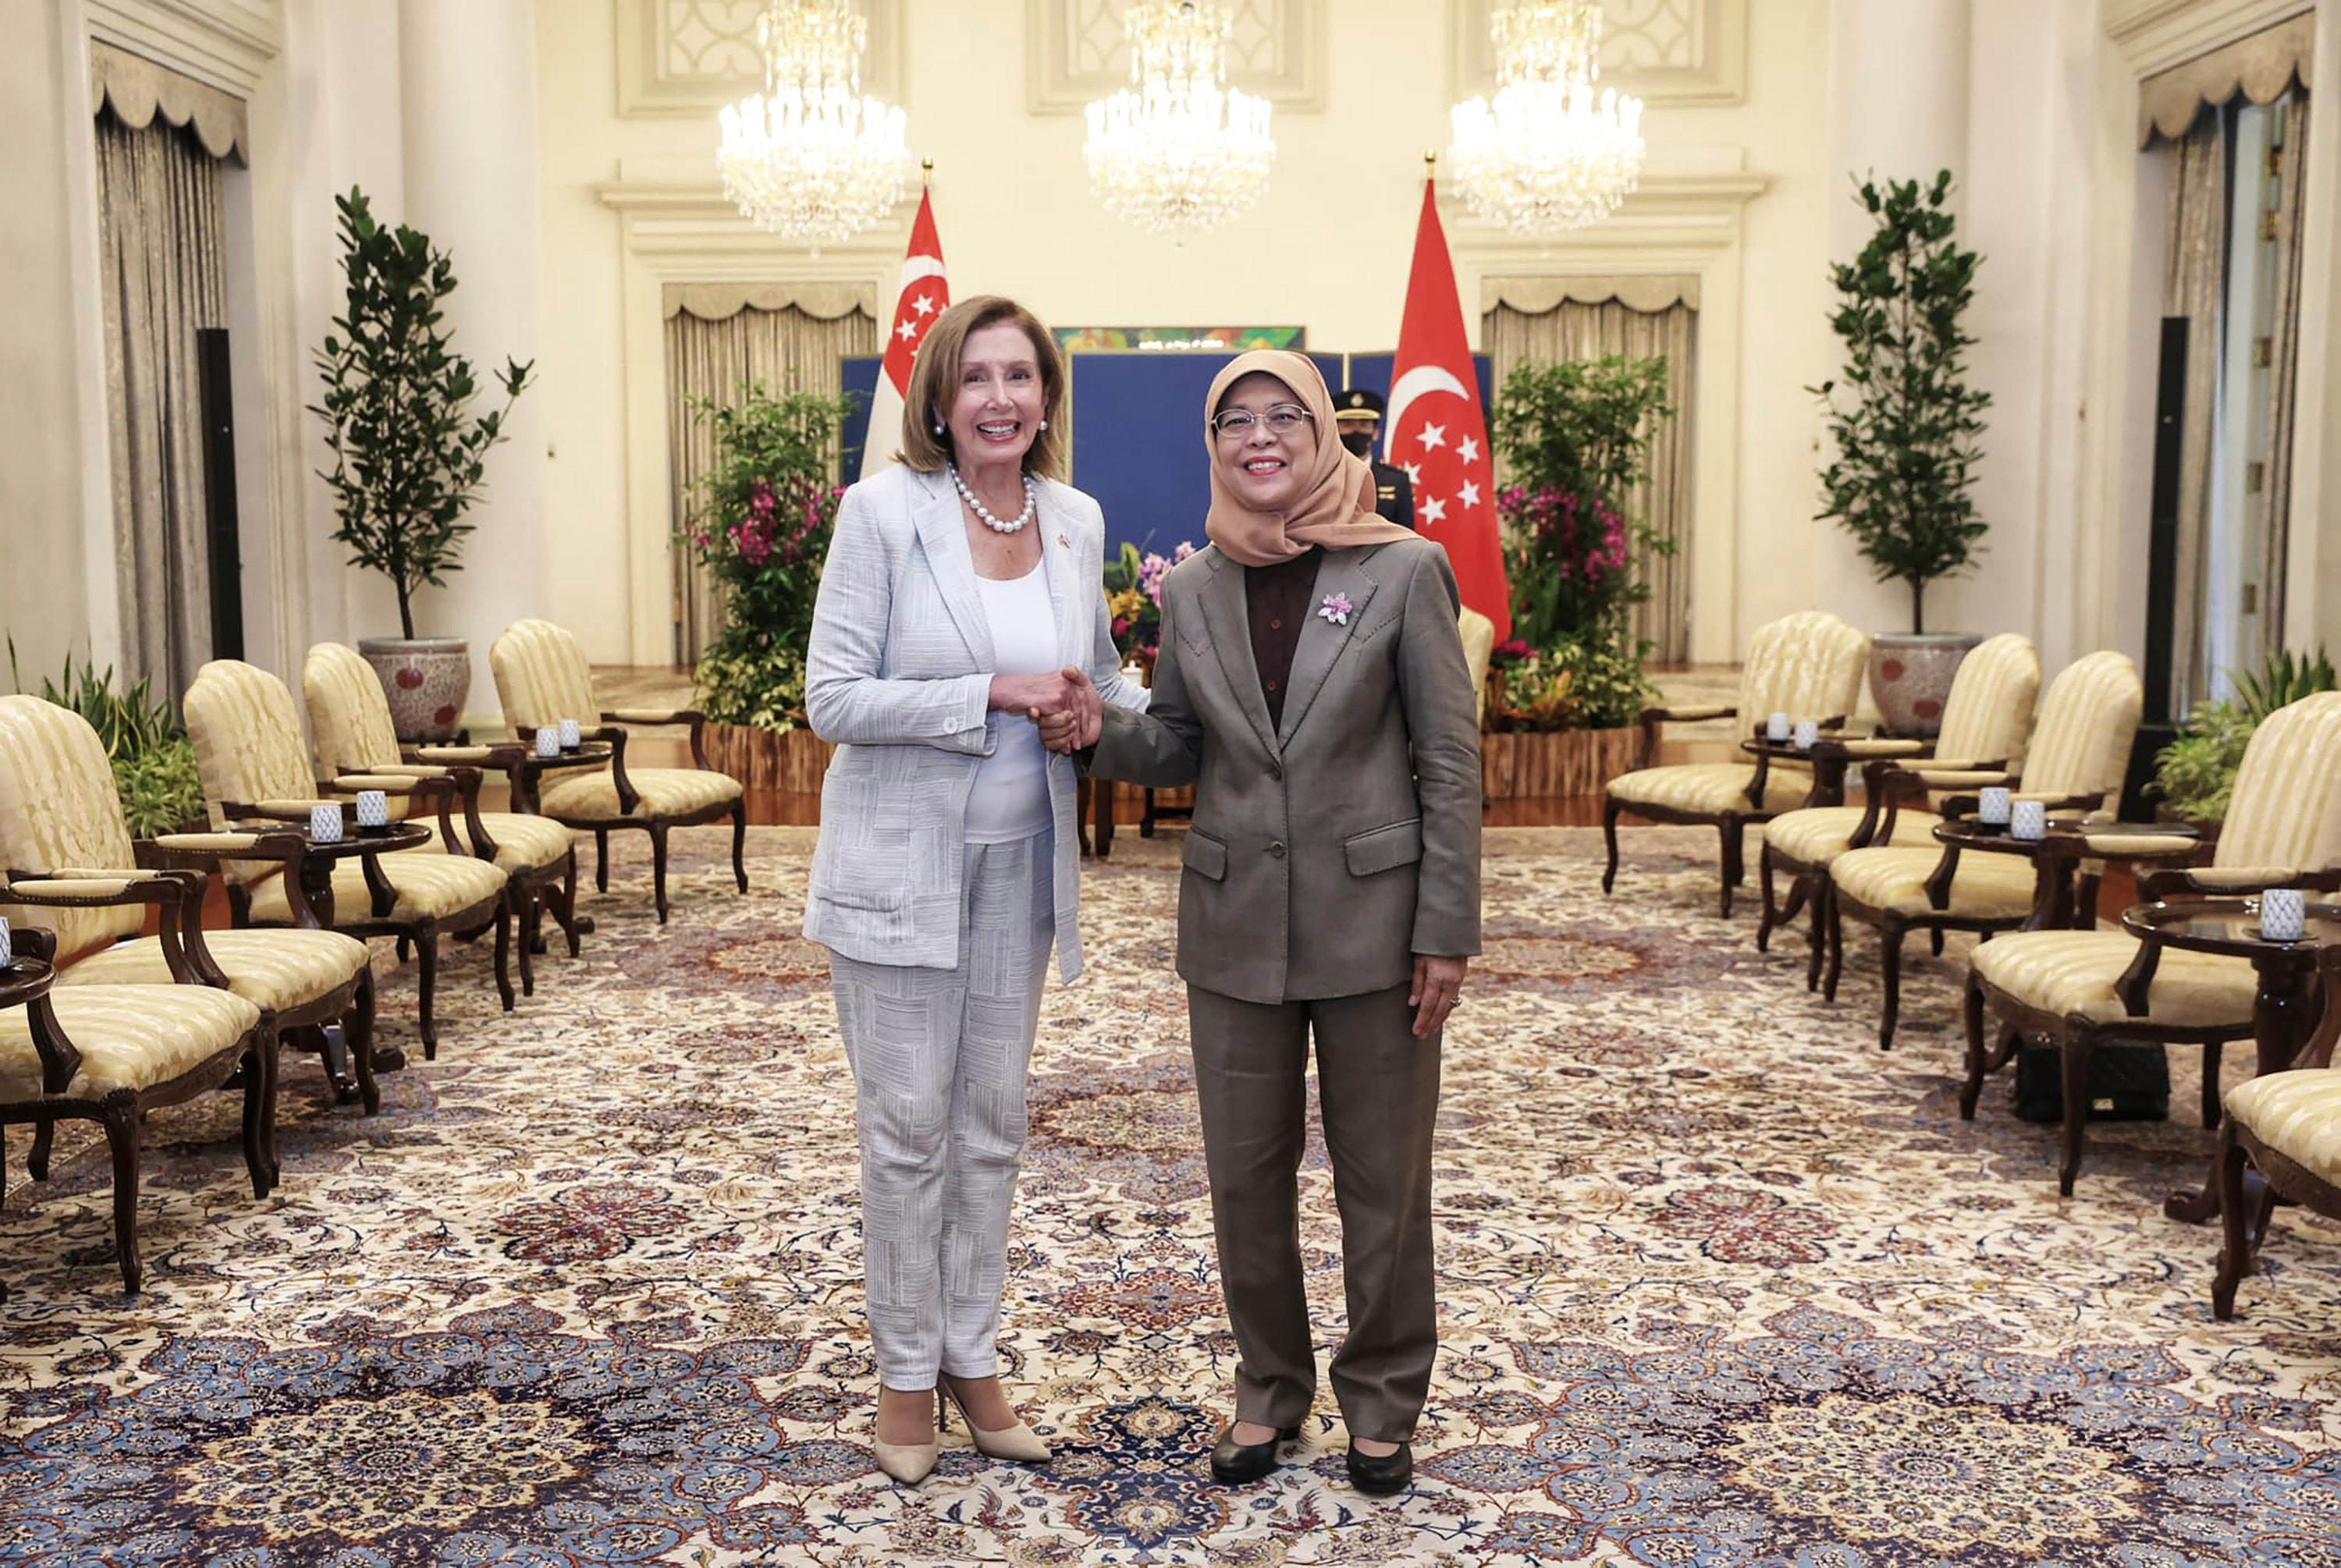 Nancy Pelosi arrives in Singapore as she begins tour of Asia